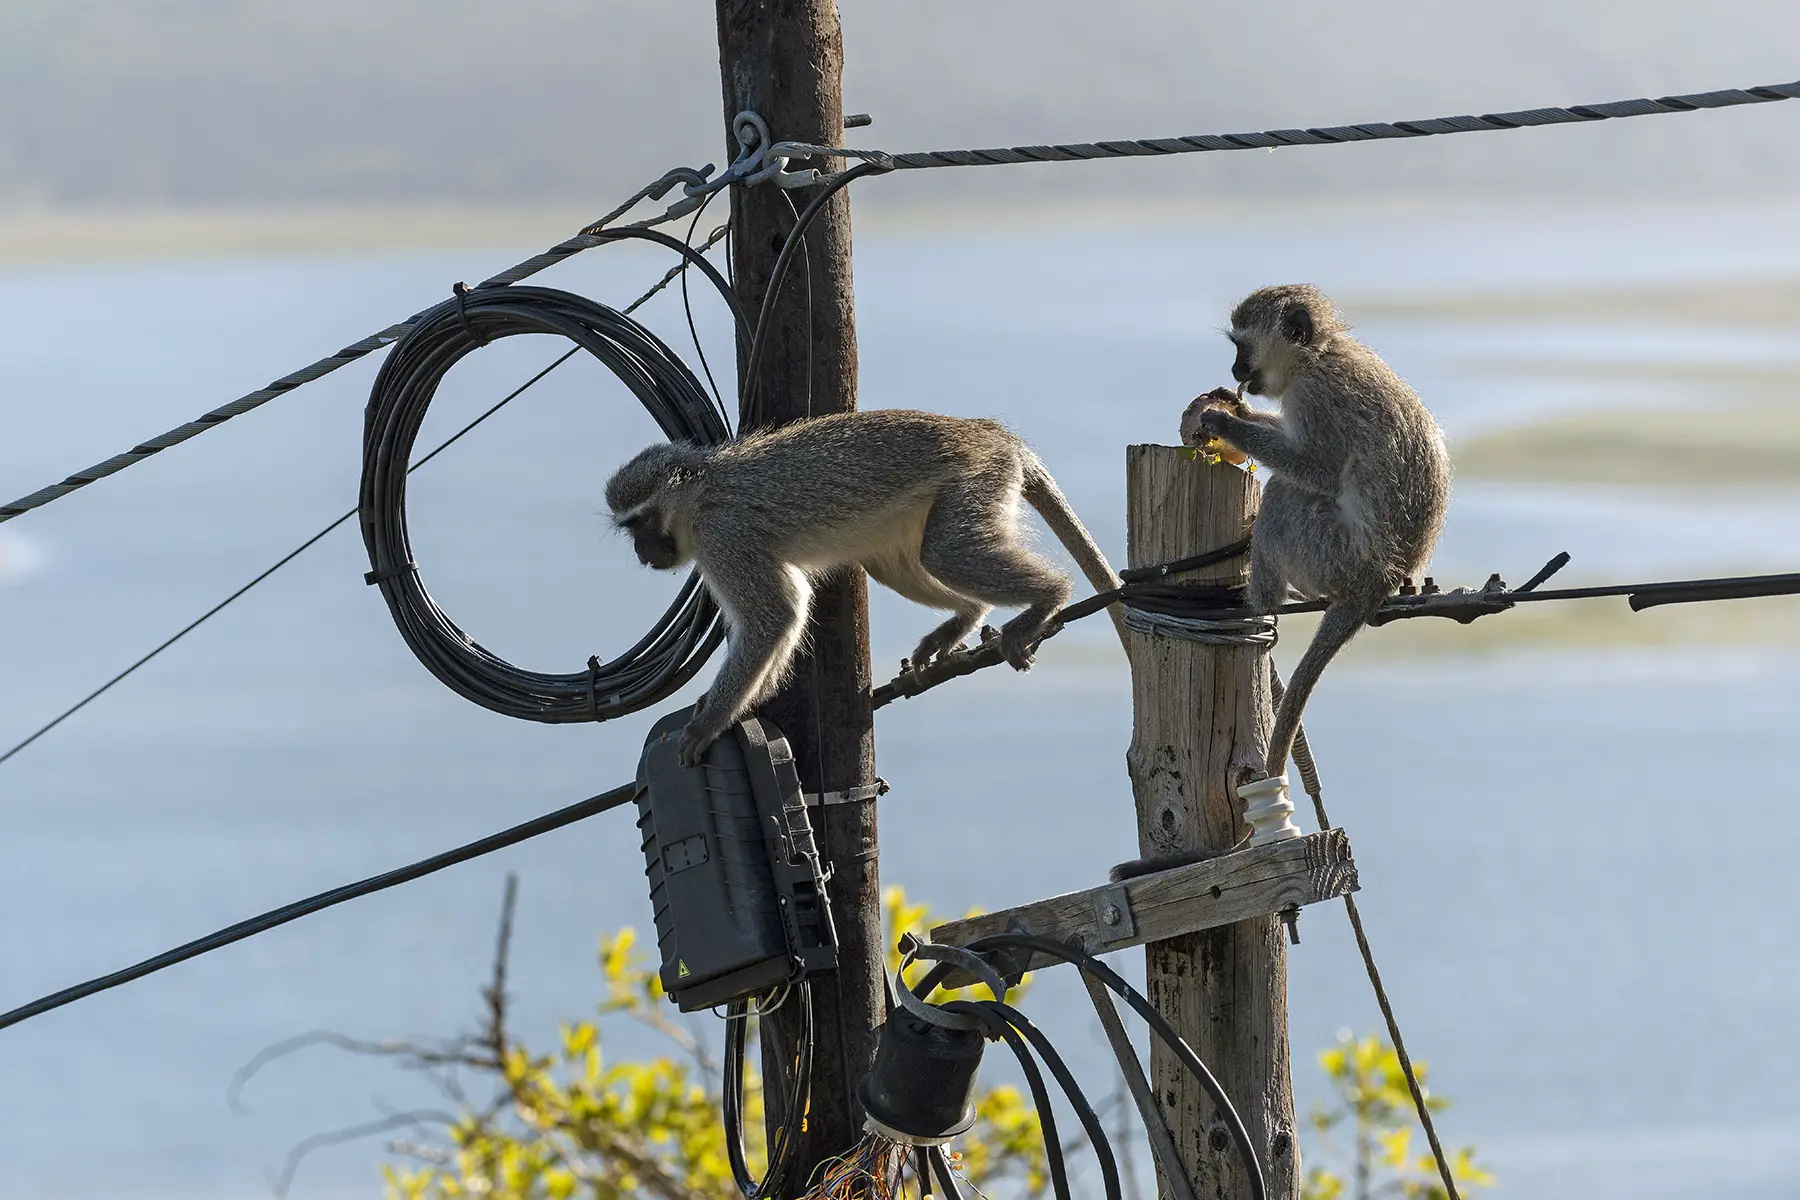 Vervet monkeys sitting on electricity wires in South Africa